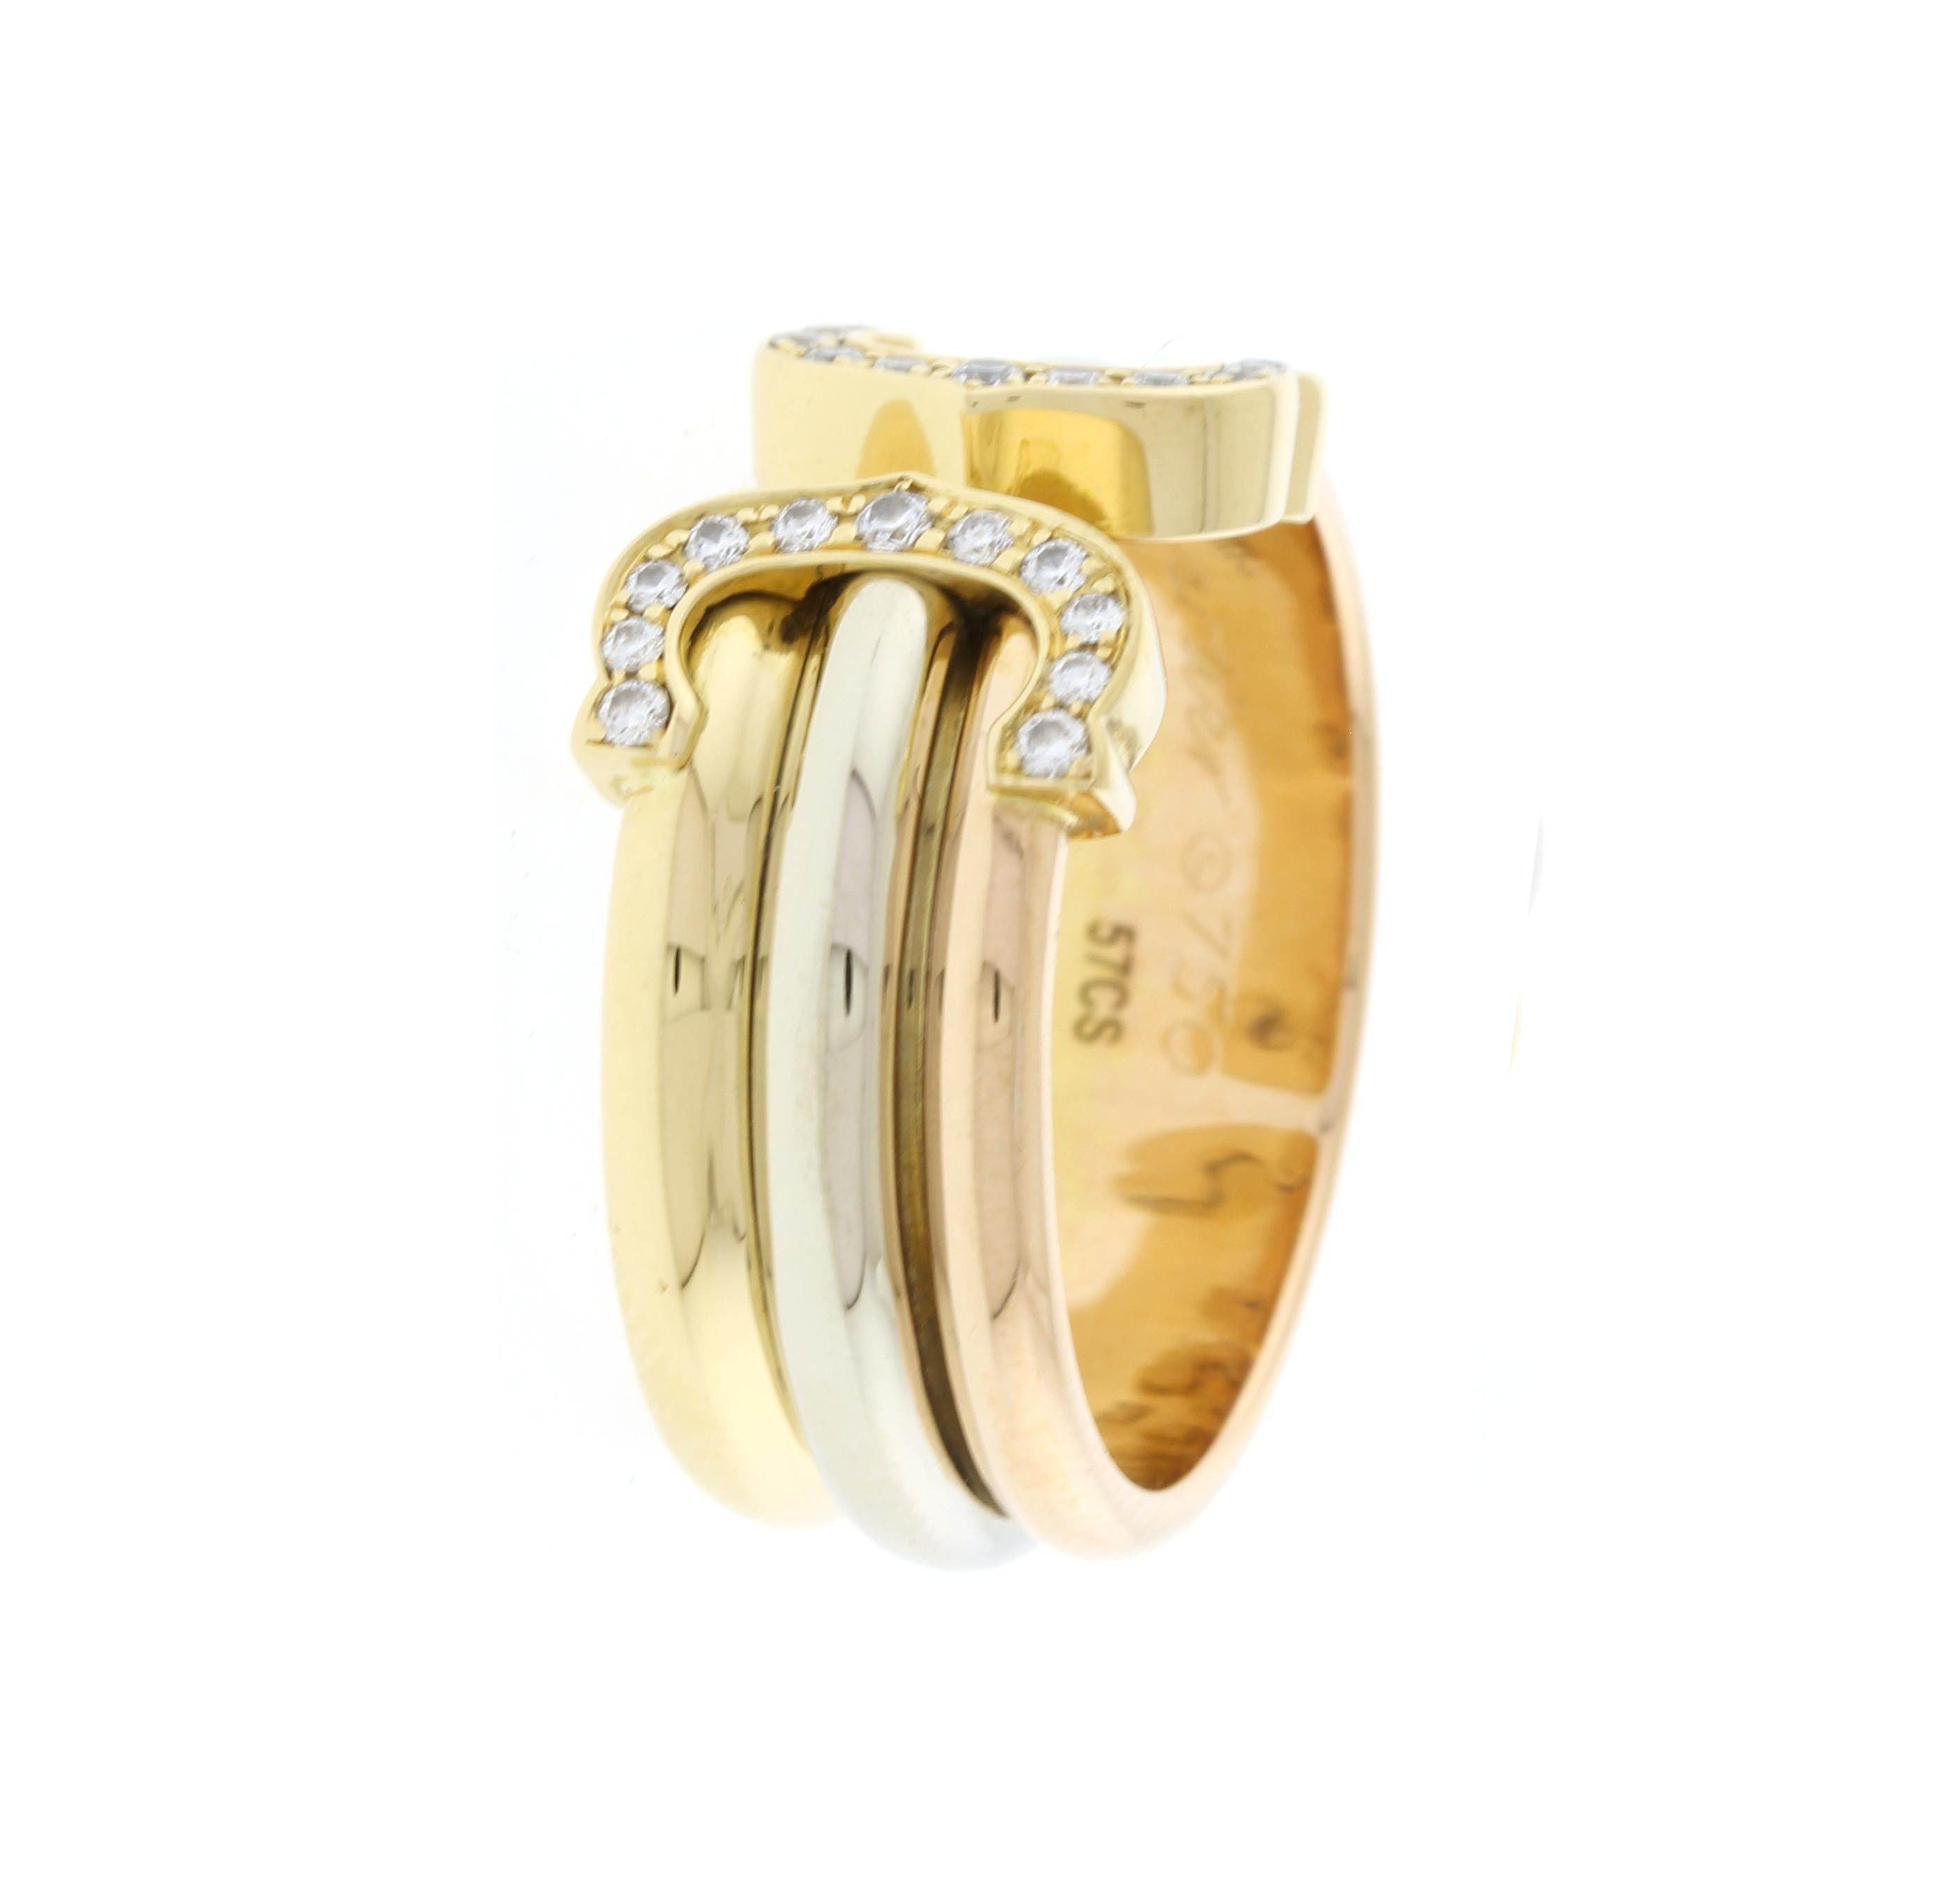 The Cartier Trinity collect  Love. Fidelity. Friendship. conceived by Louis Cartier in 1924,   Three bands in pink, yellow, and white gold.
♦ Designer: Cartier
♦ Metal: 18 karat
♦ Circa 1980s
♦ 22Diamond=.26carats
♦ Size 8½
♦ Circa 1980s
♦ 9.5mm